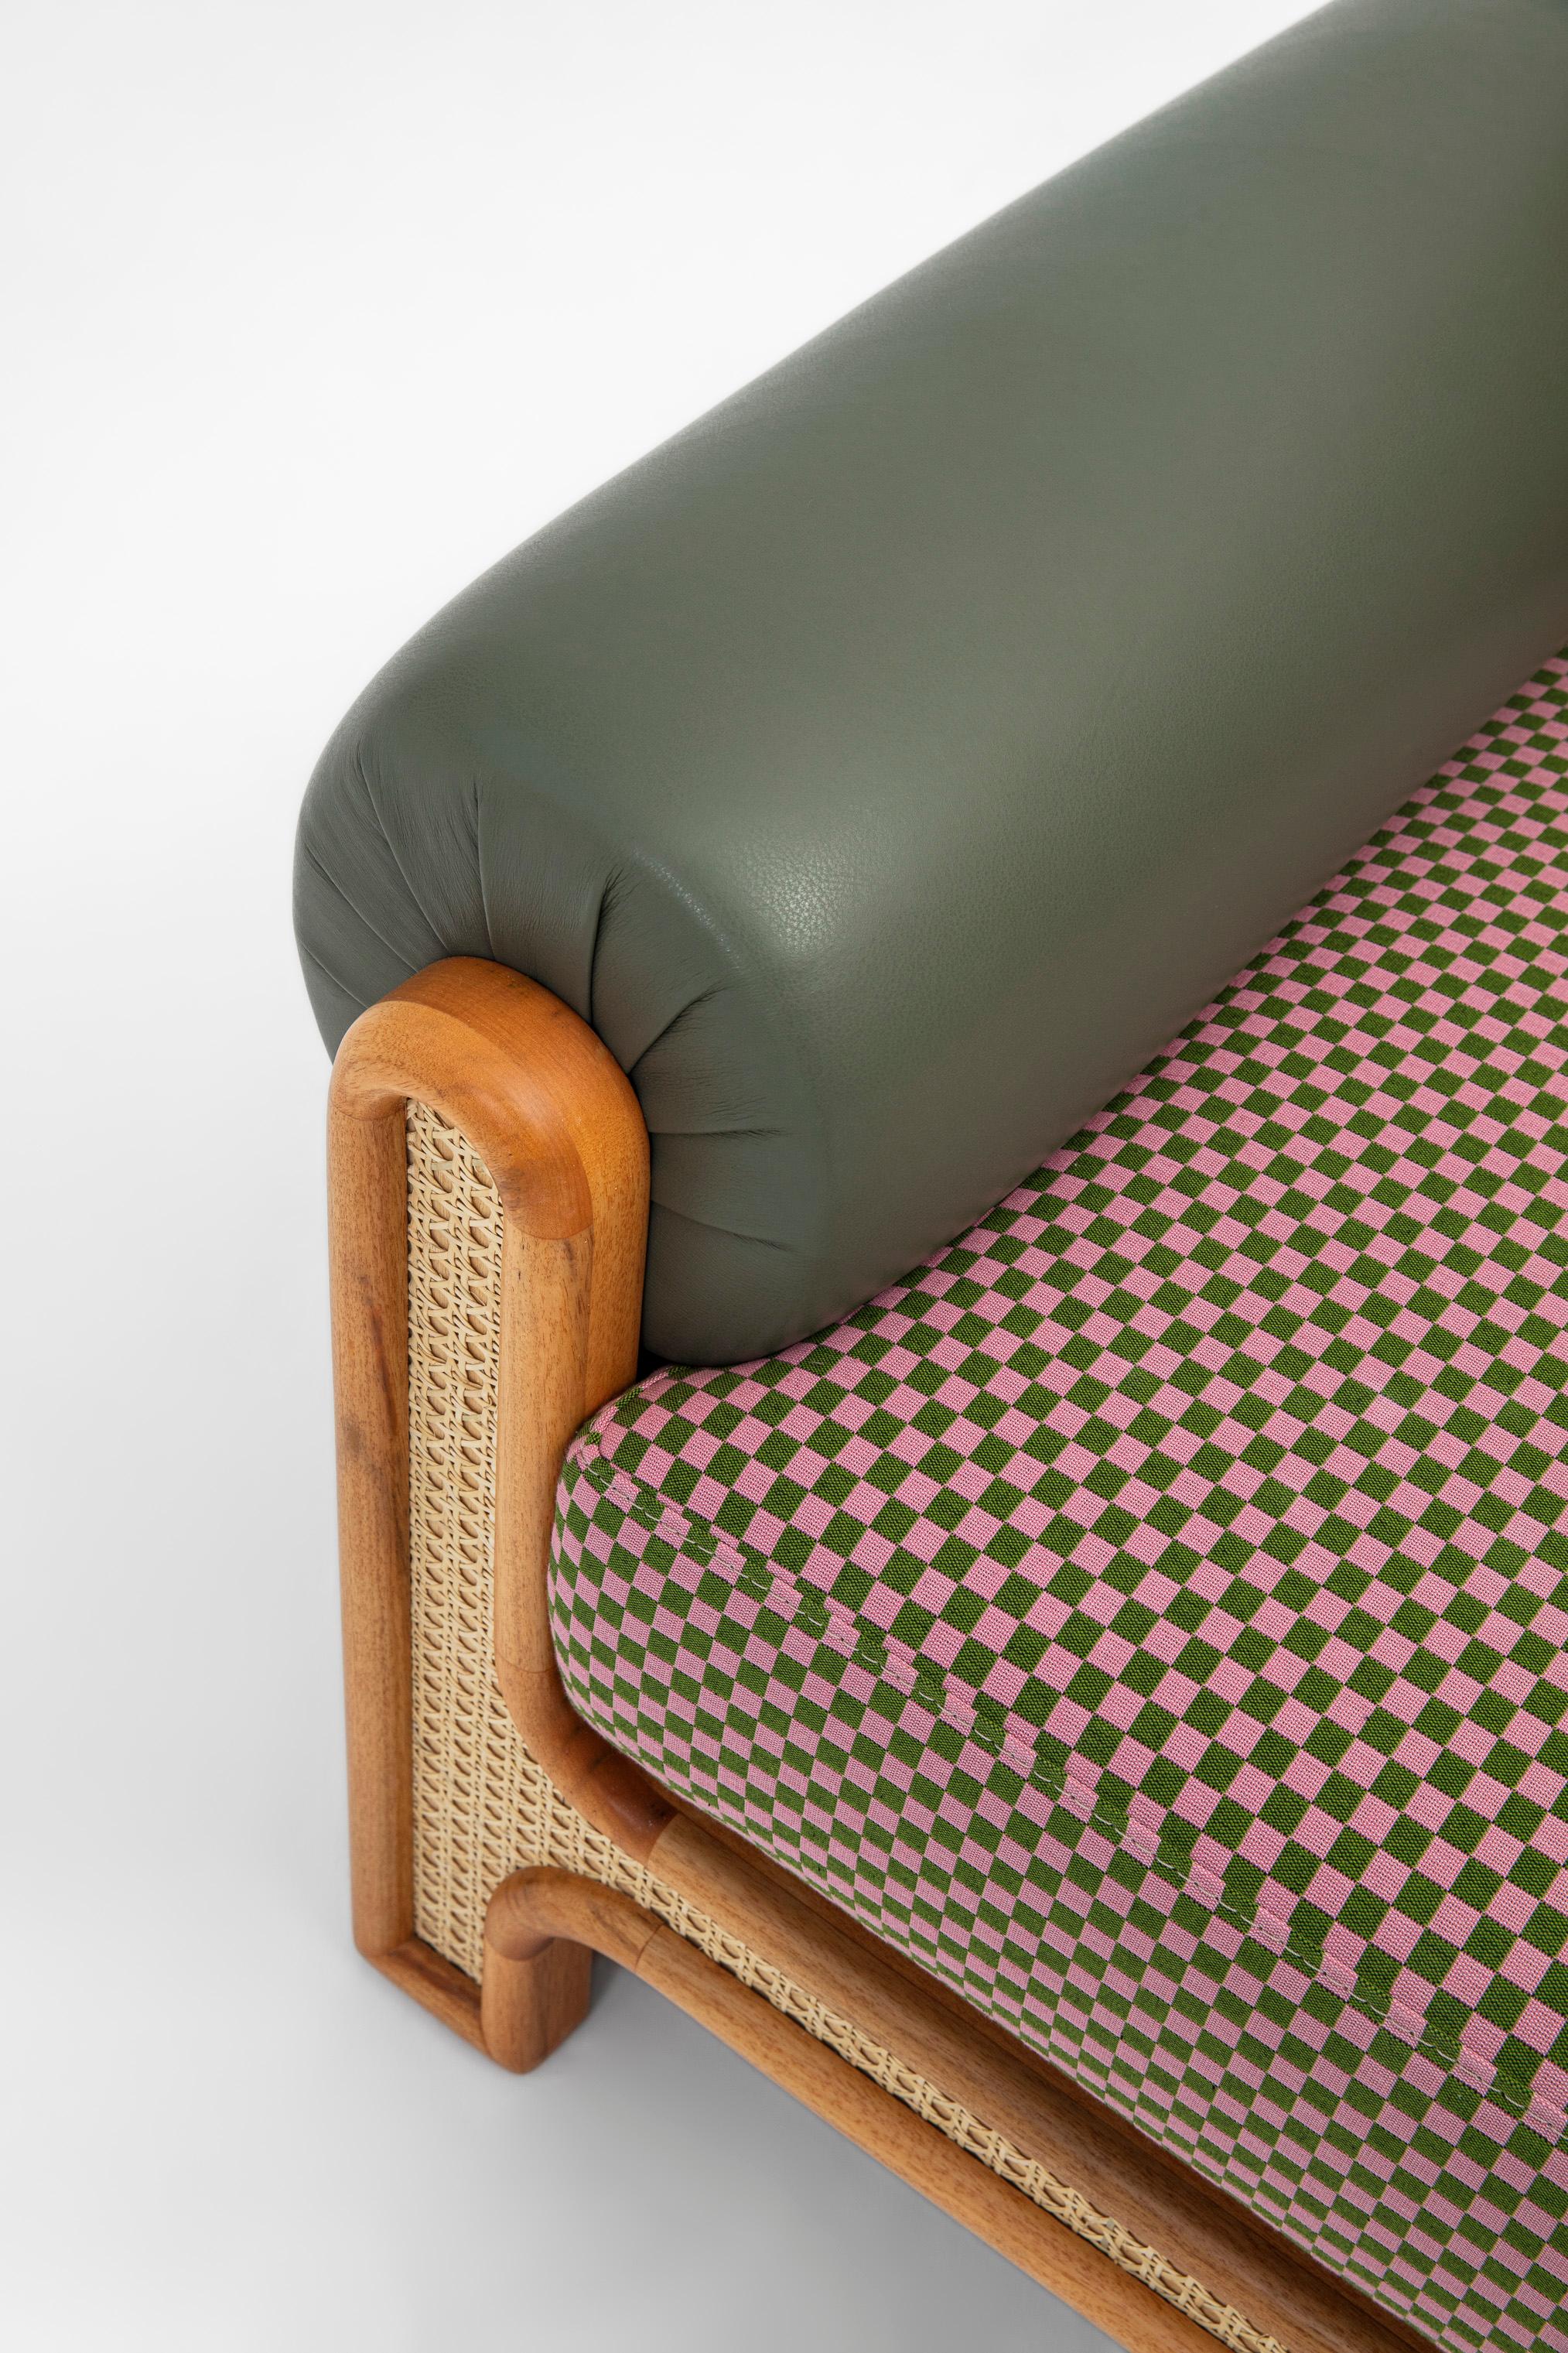 N-Gene Armchair with Blue Checker Fabric and Brown Leather In New Condition For Sale In New York, NY